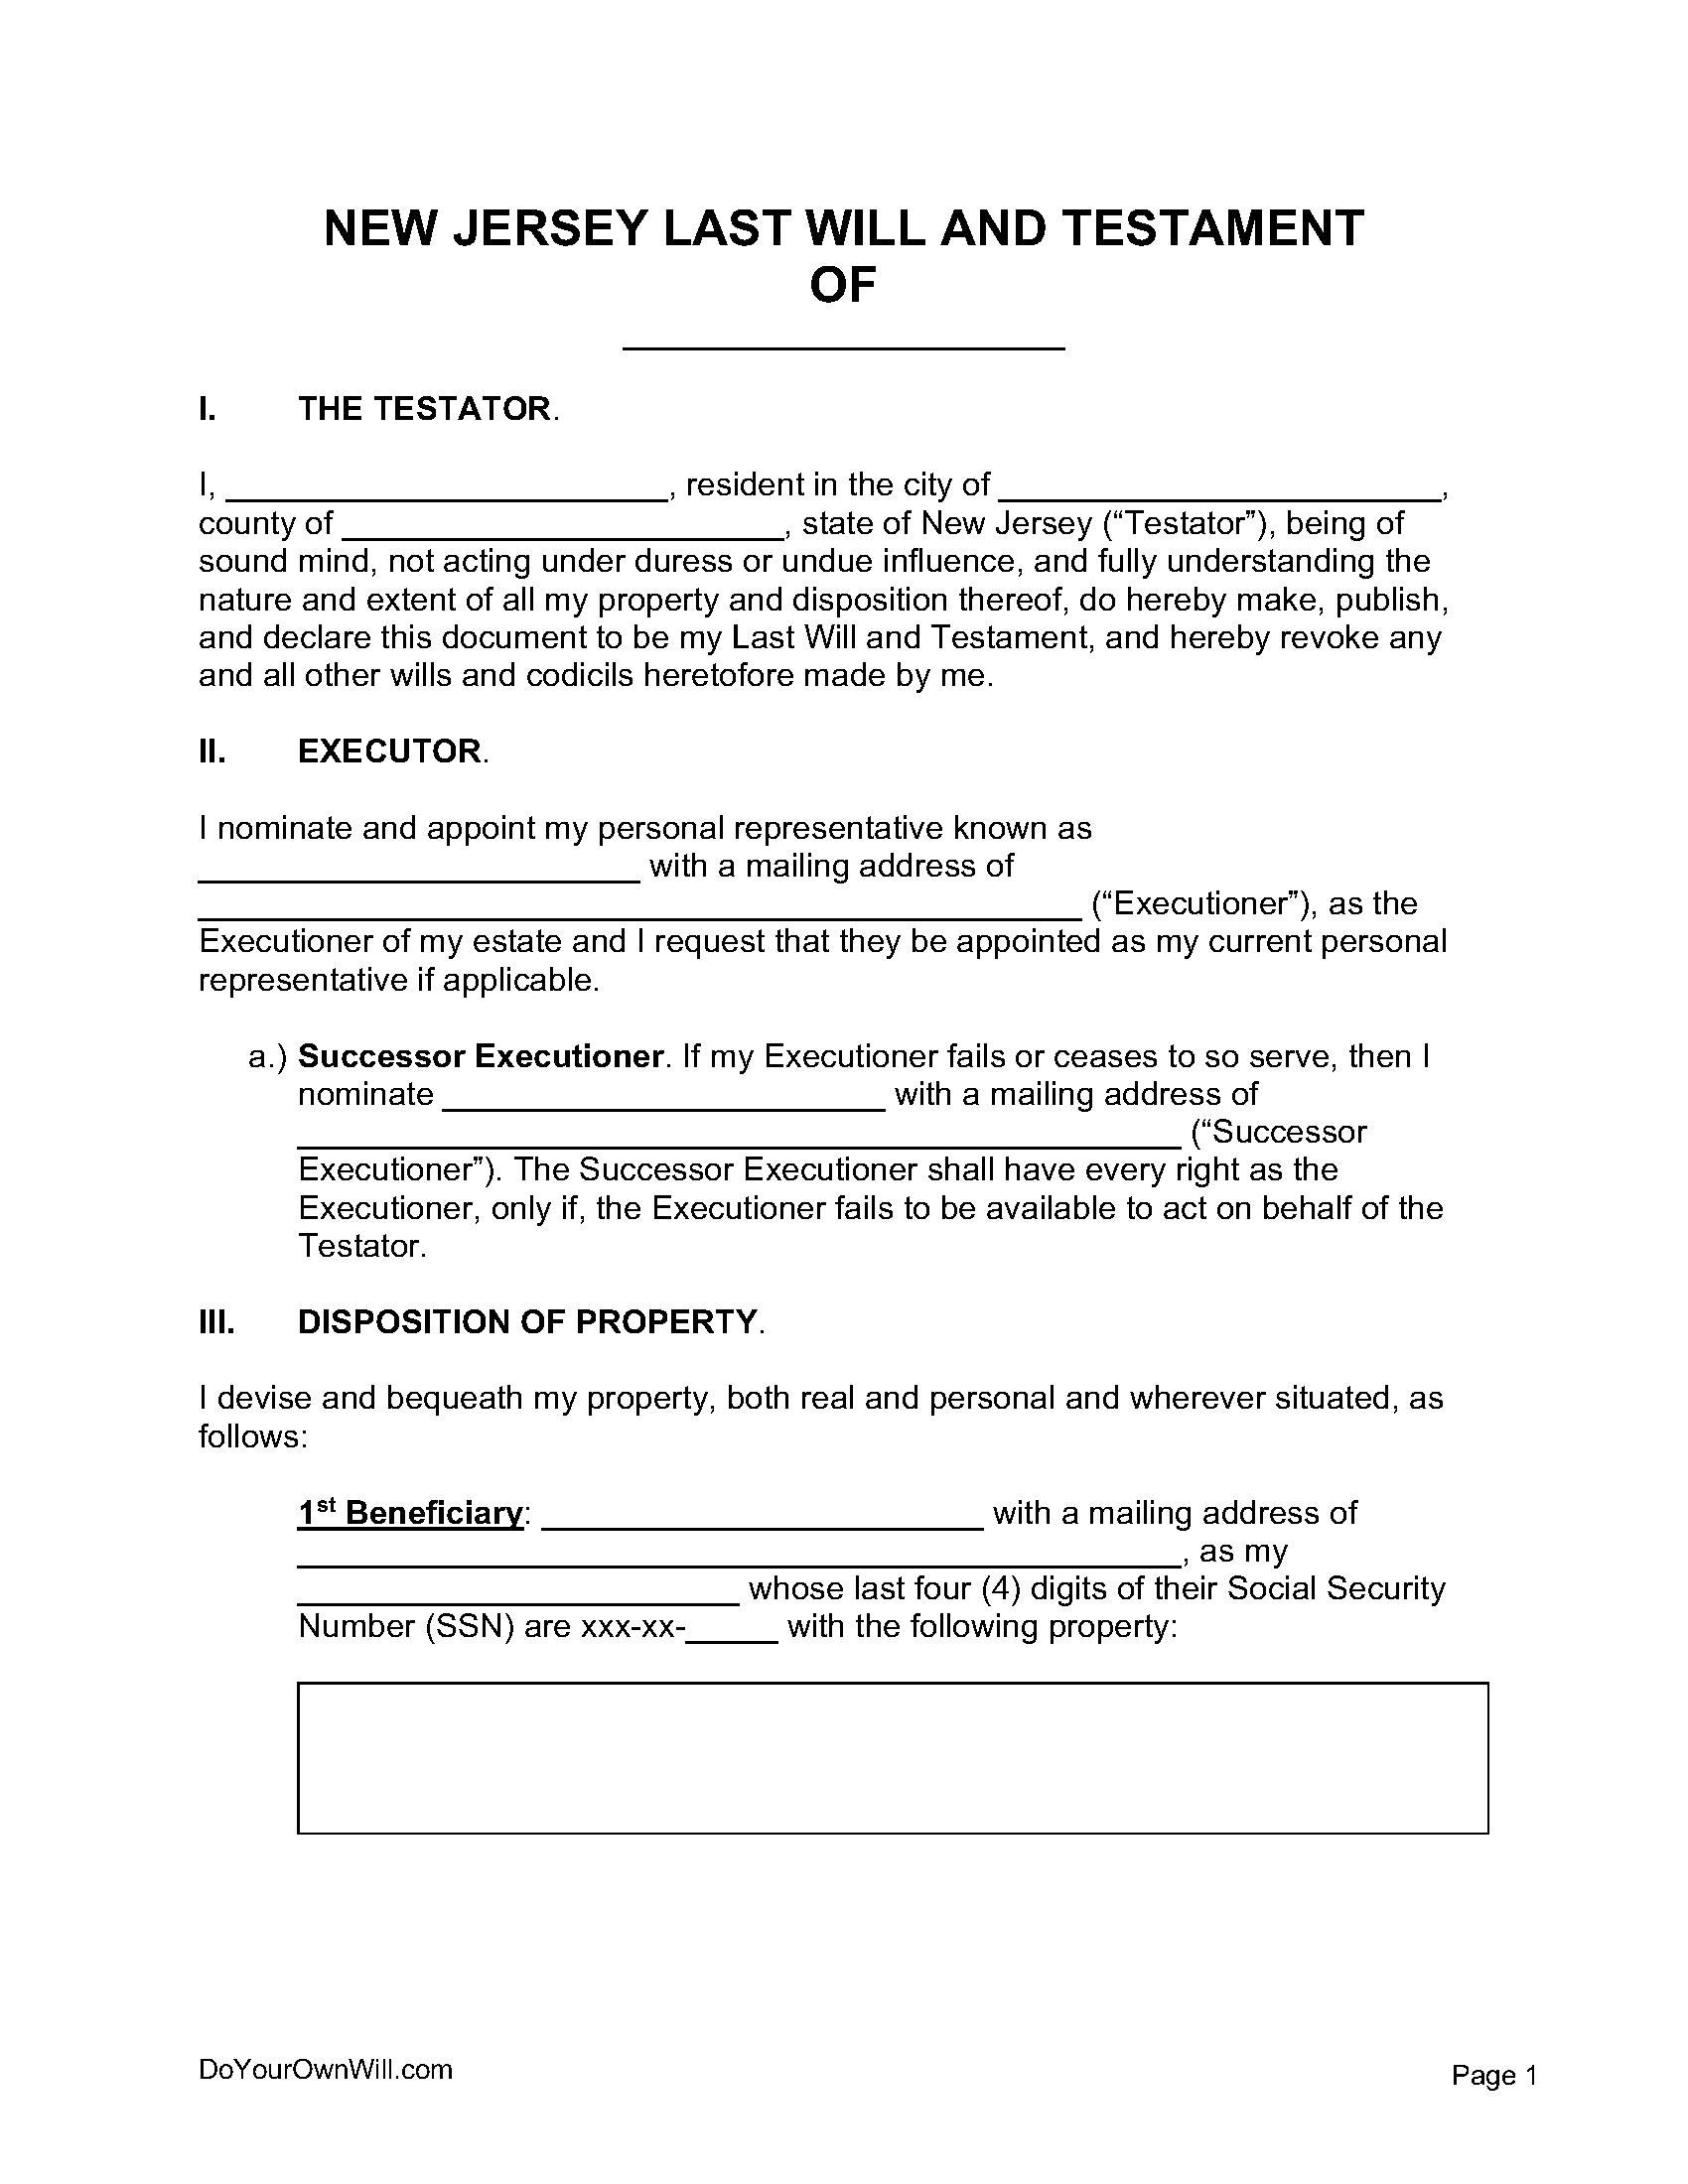 free-new-jersey-last-will-and-testament-form-pdf-word-1-odt